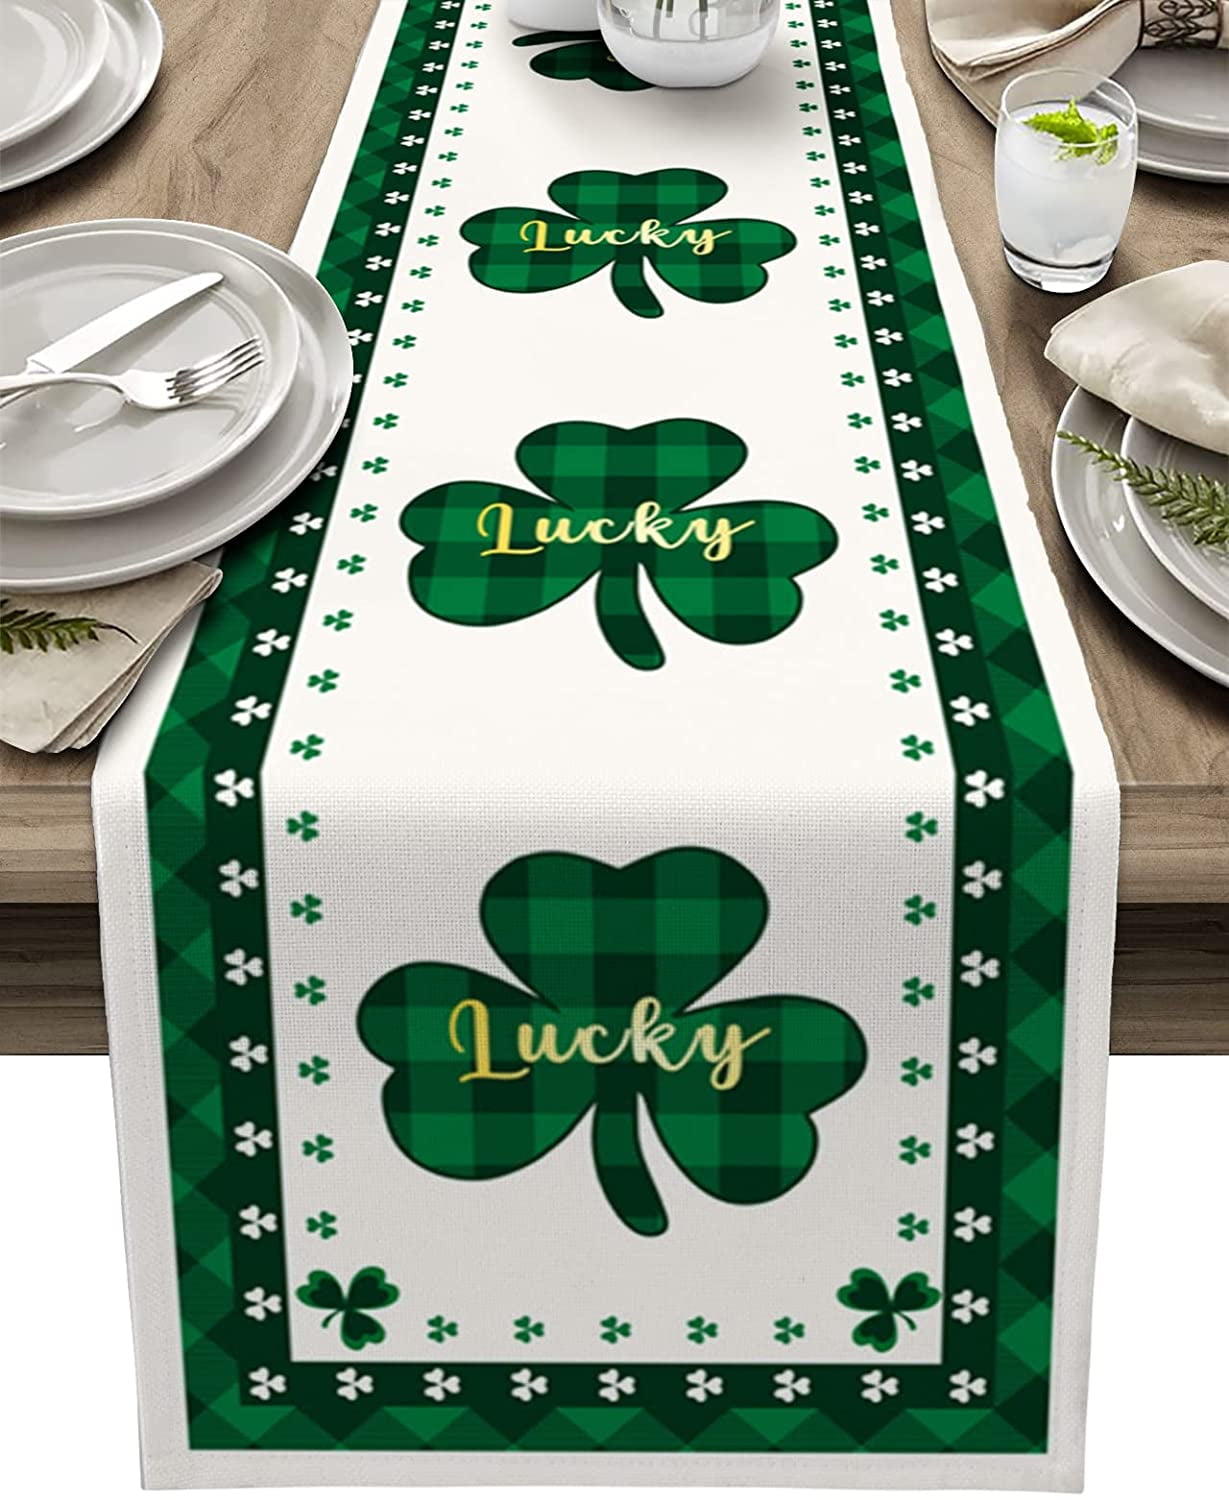 Rustic Farmhouse Style Natural Burlap Table Runner with St Patrick's Day Green Ruffles